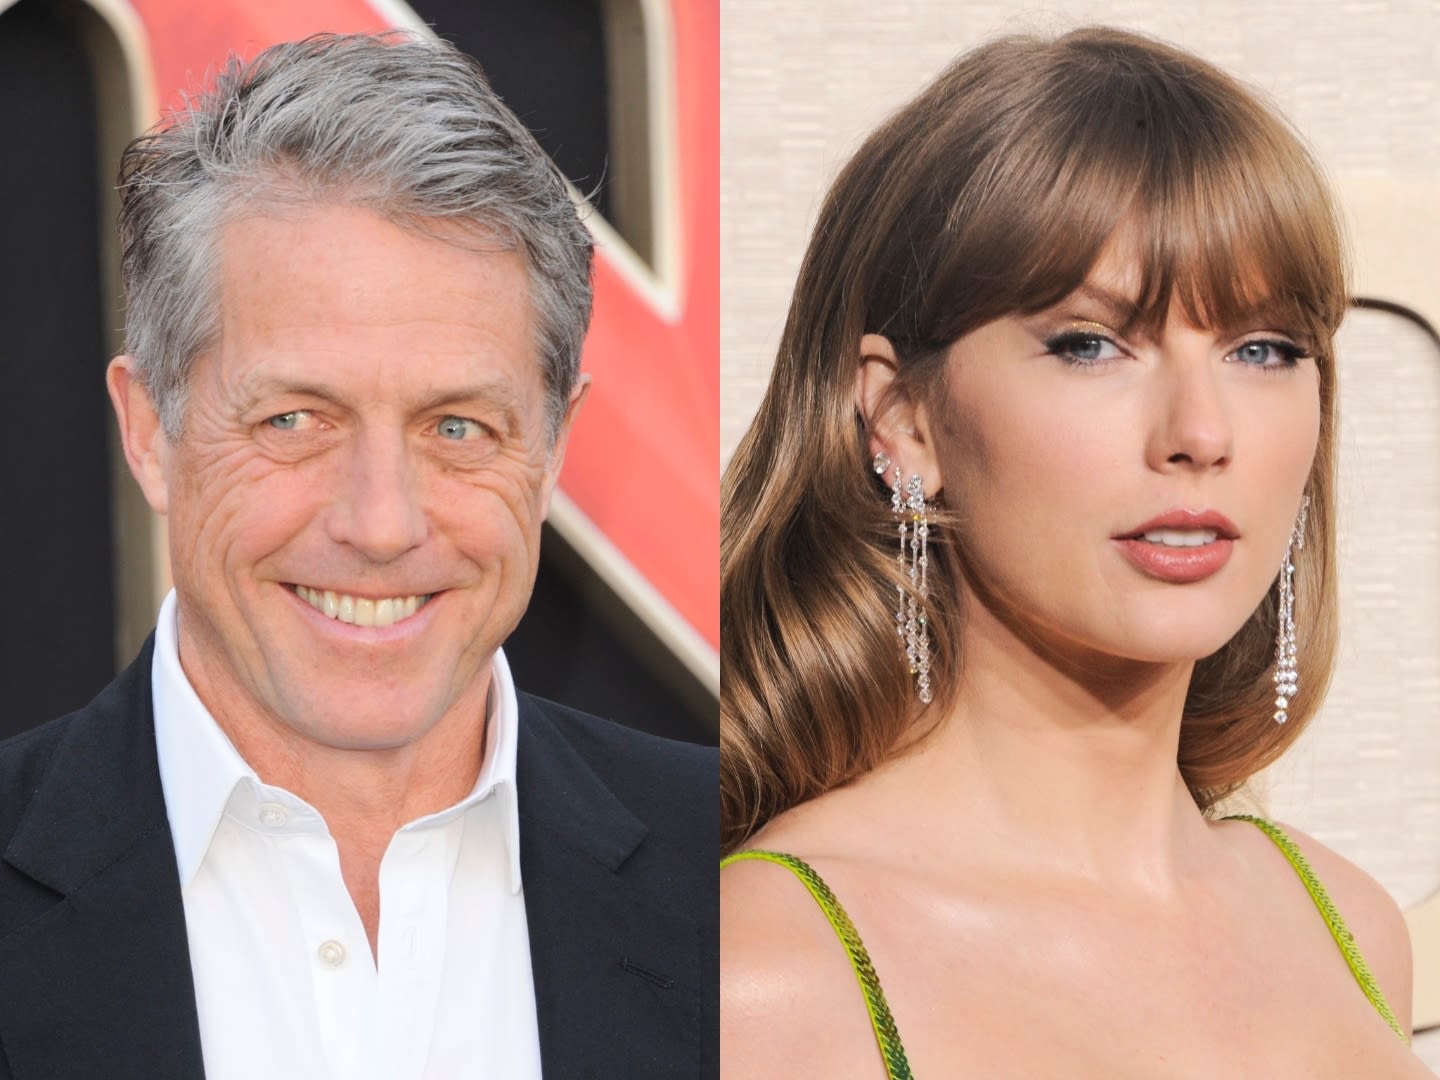 Hugh Grant Finally Understands the Charm of Being a Taylor Swift Fan